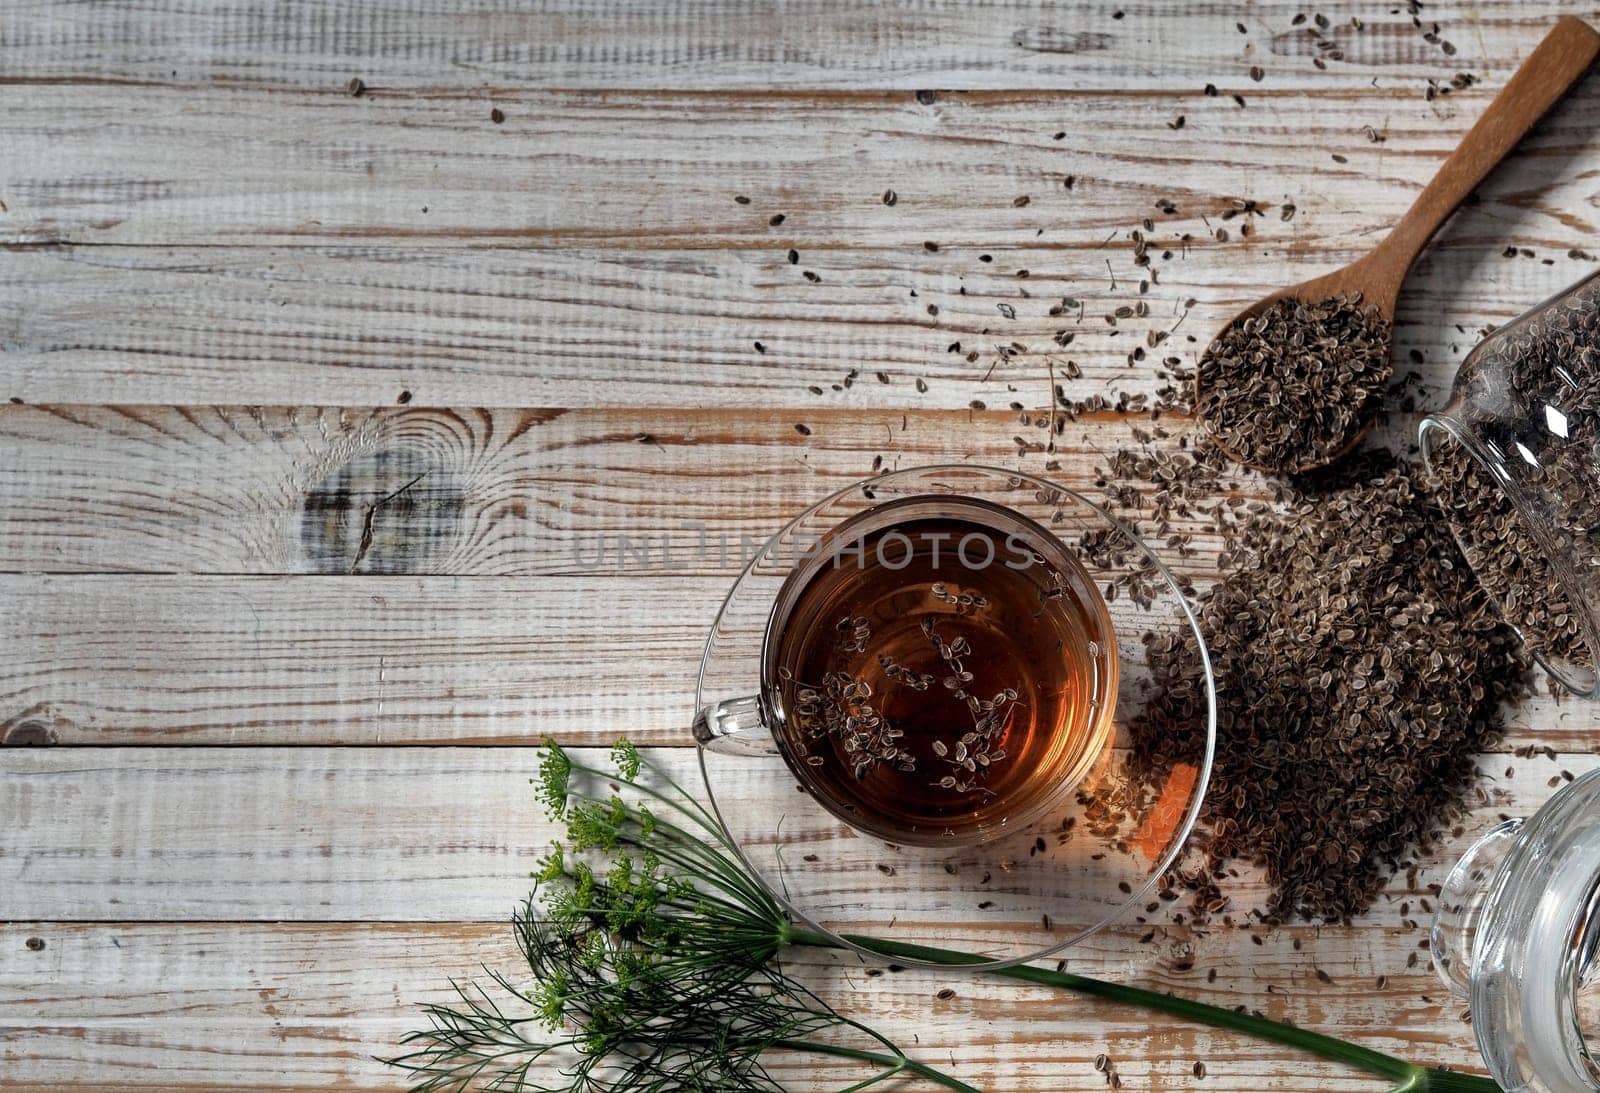 Medicinal tea using dried dill seeds in a cup on a natural wooden table.